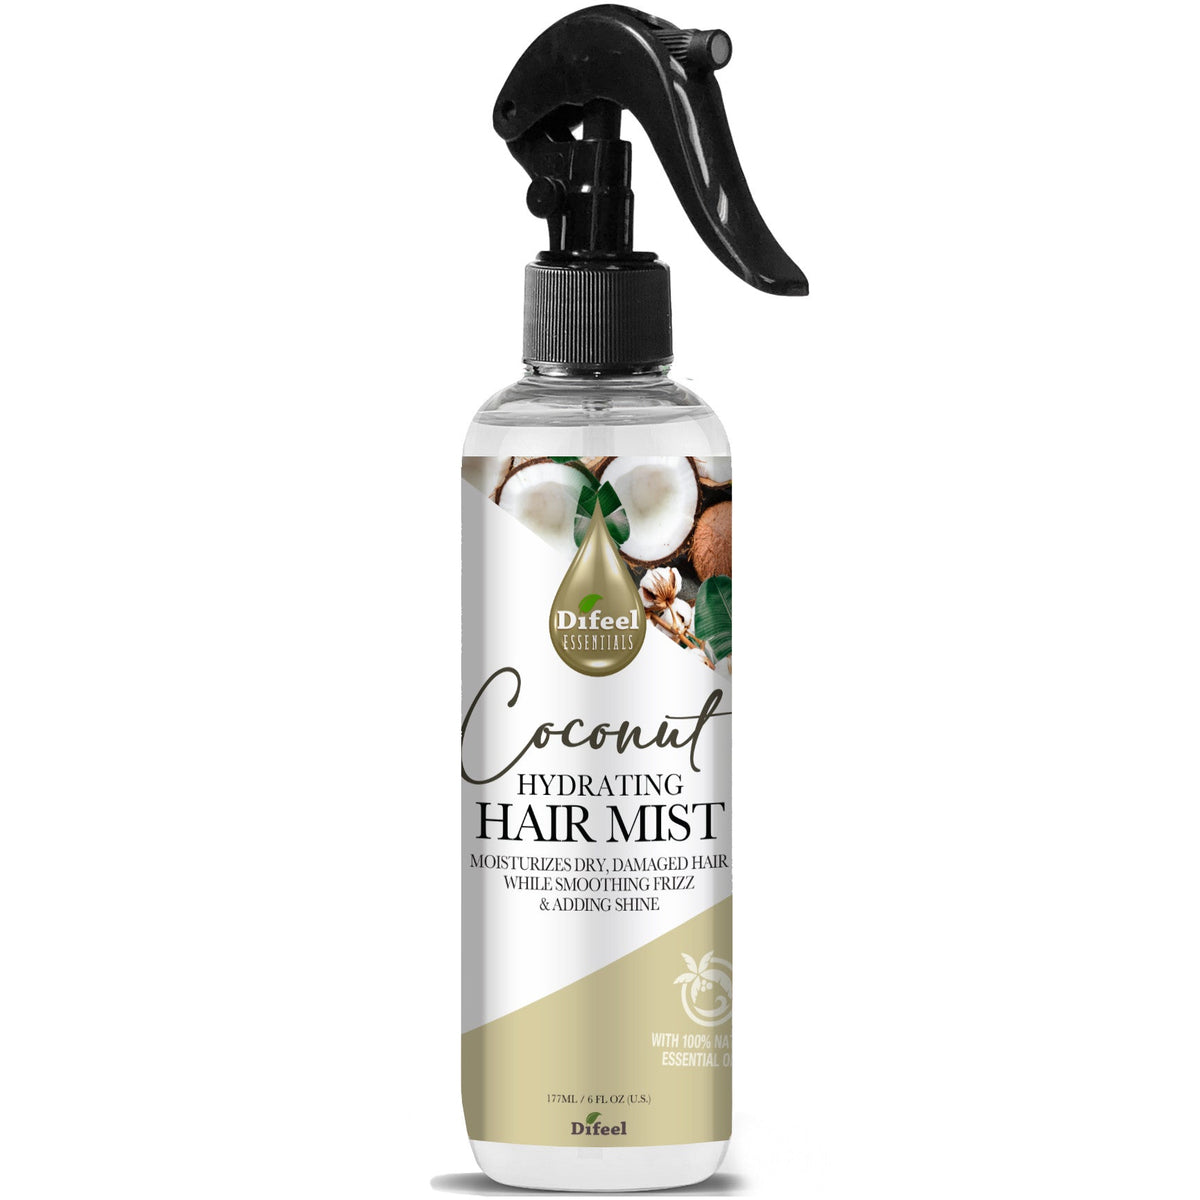 Difeel Essentials Hydrating Coconut - Hair Mist 6 oz. by difeel - find your natural beauty